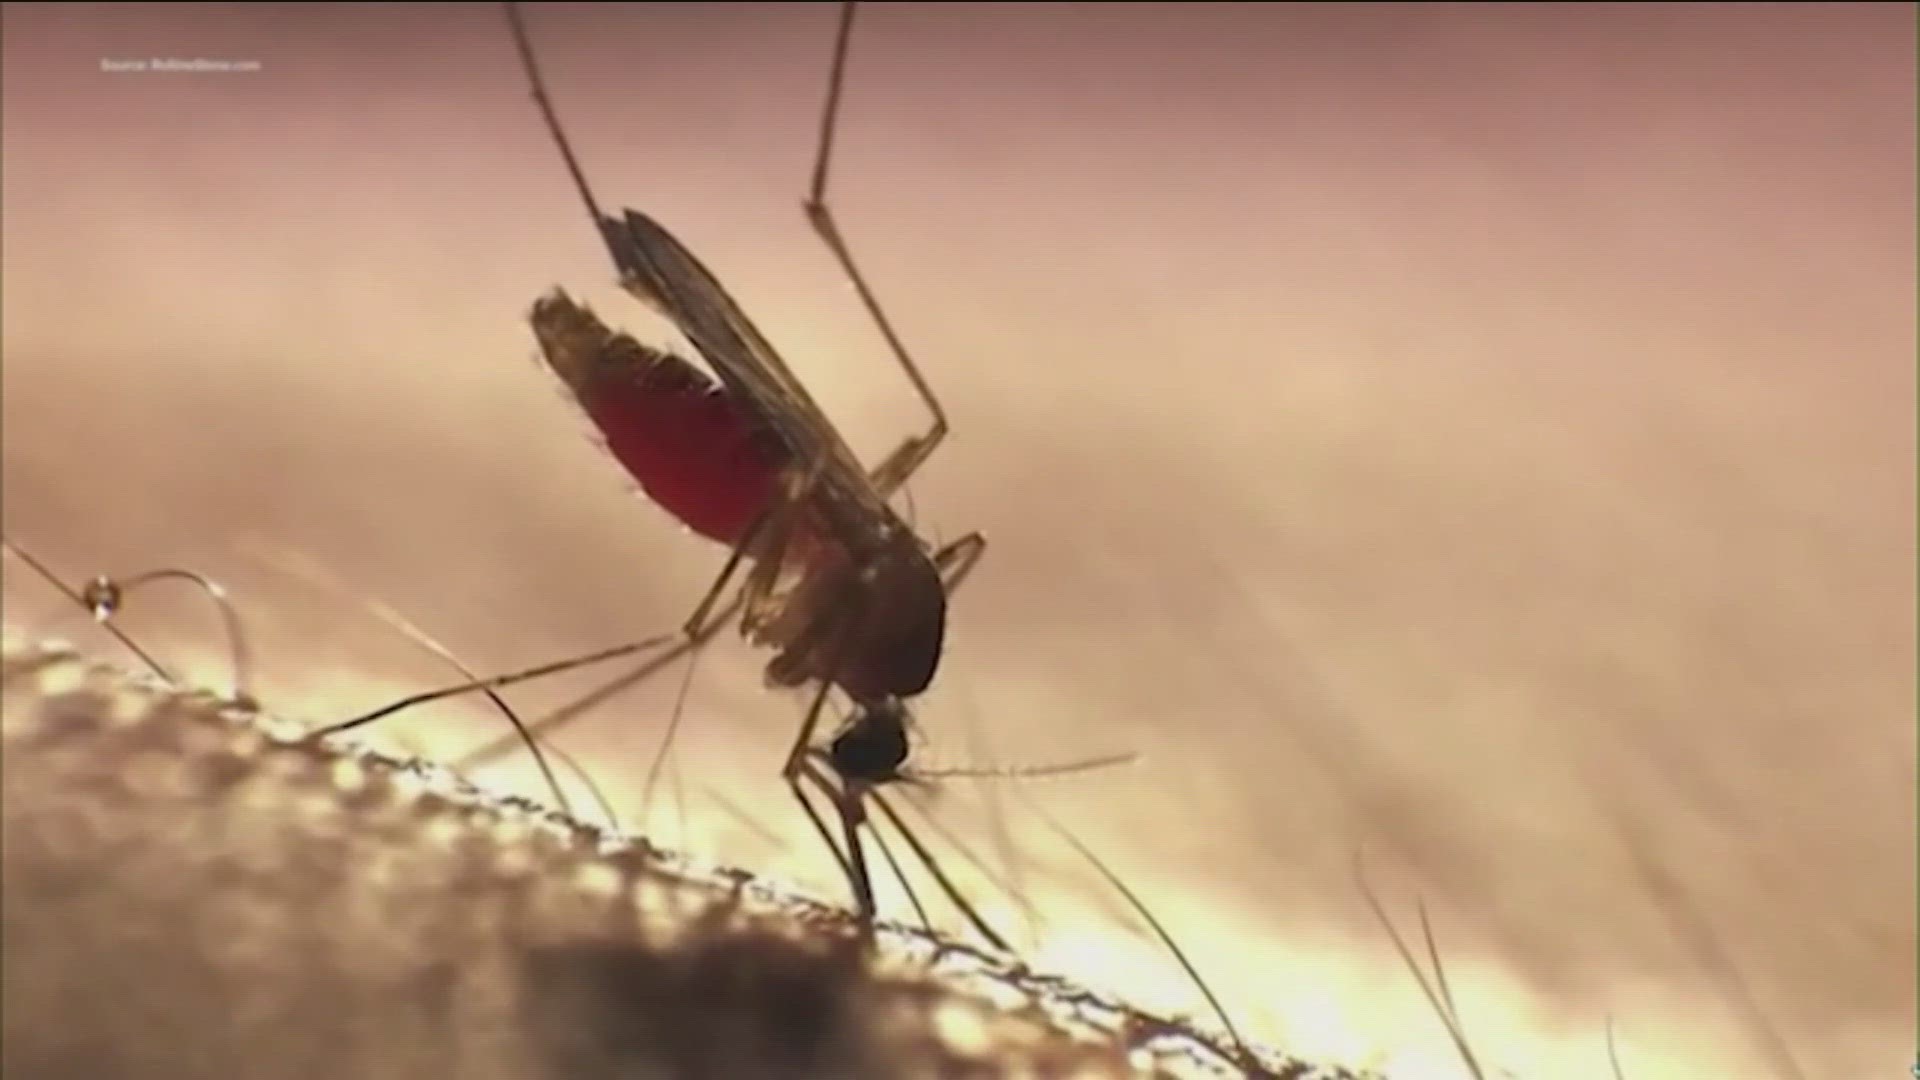 Extreme heat in Central Texas means mosquito activity has declined in the area.